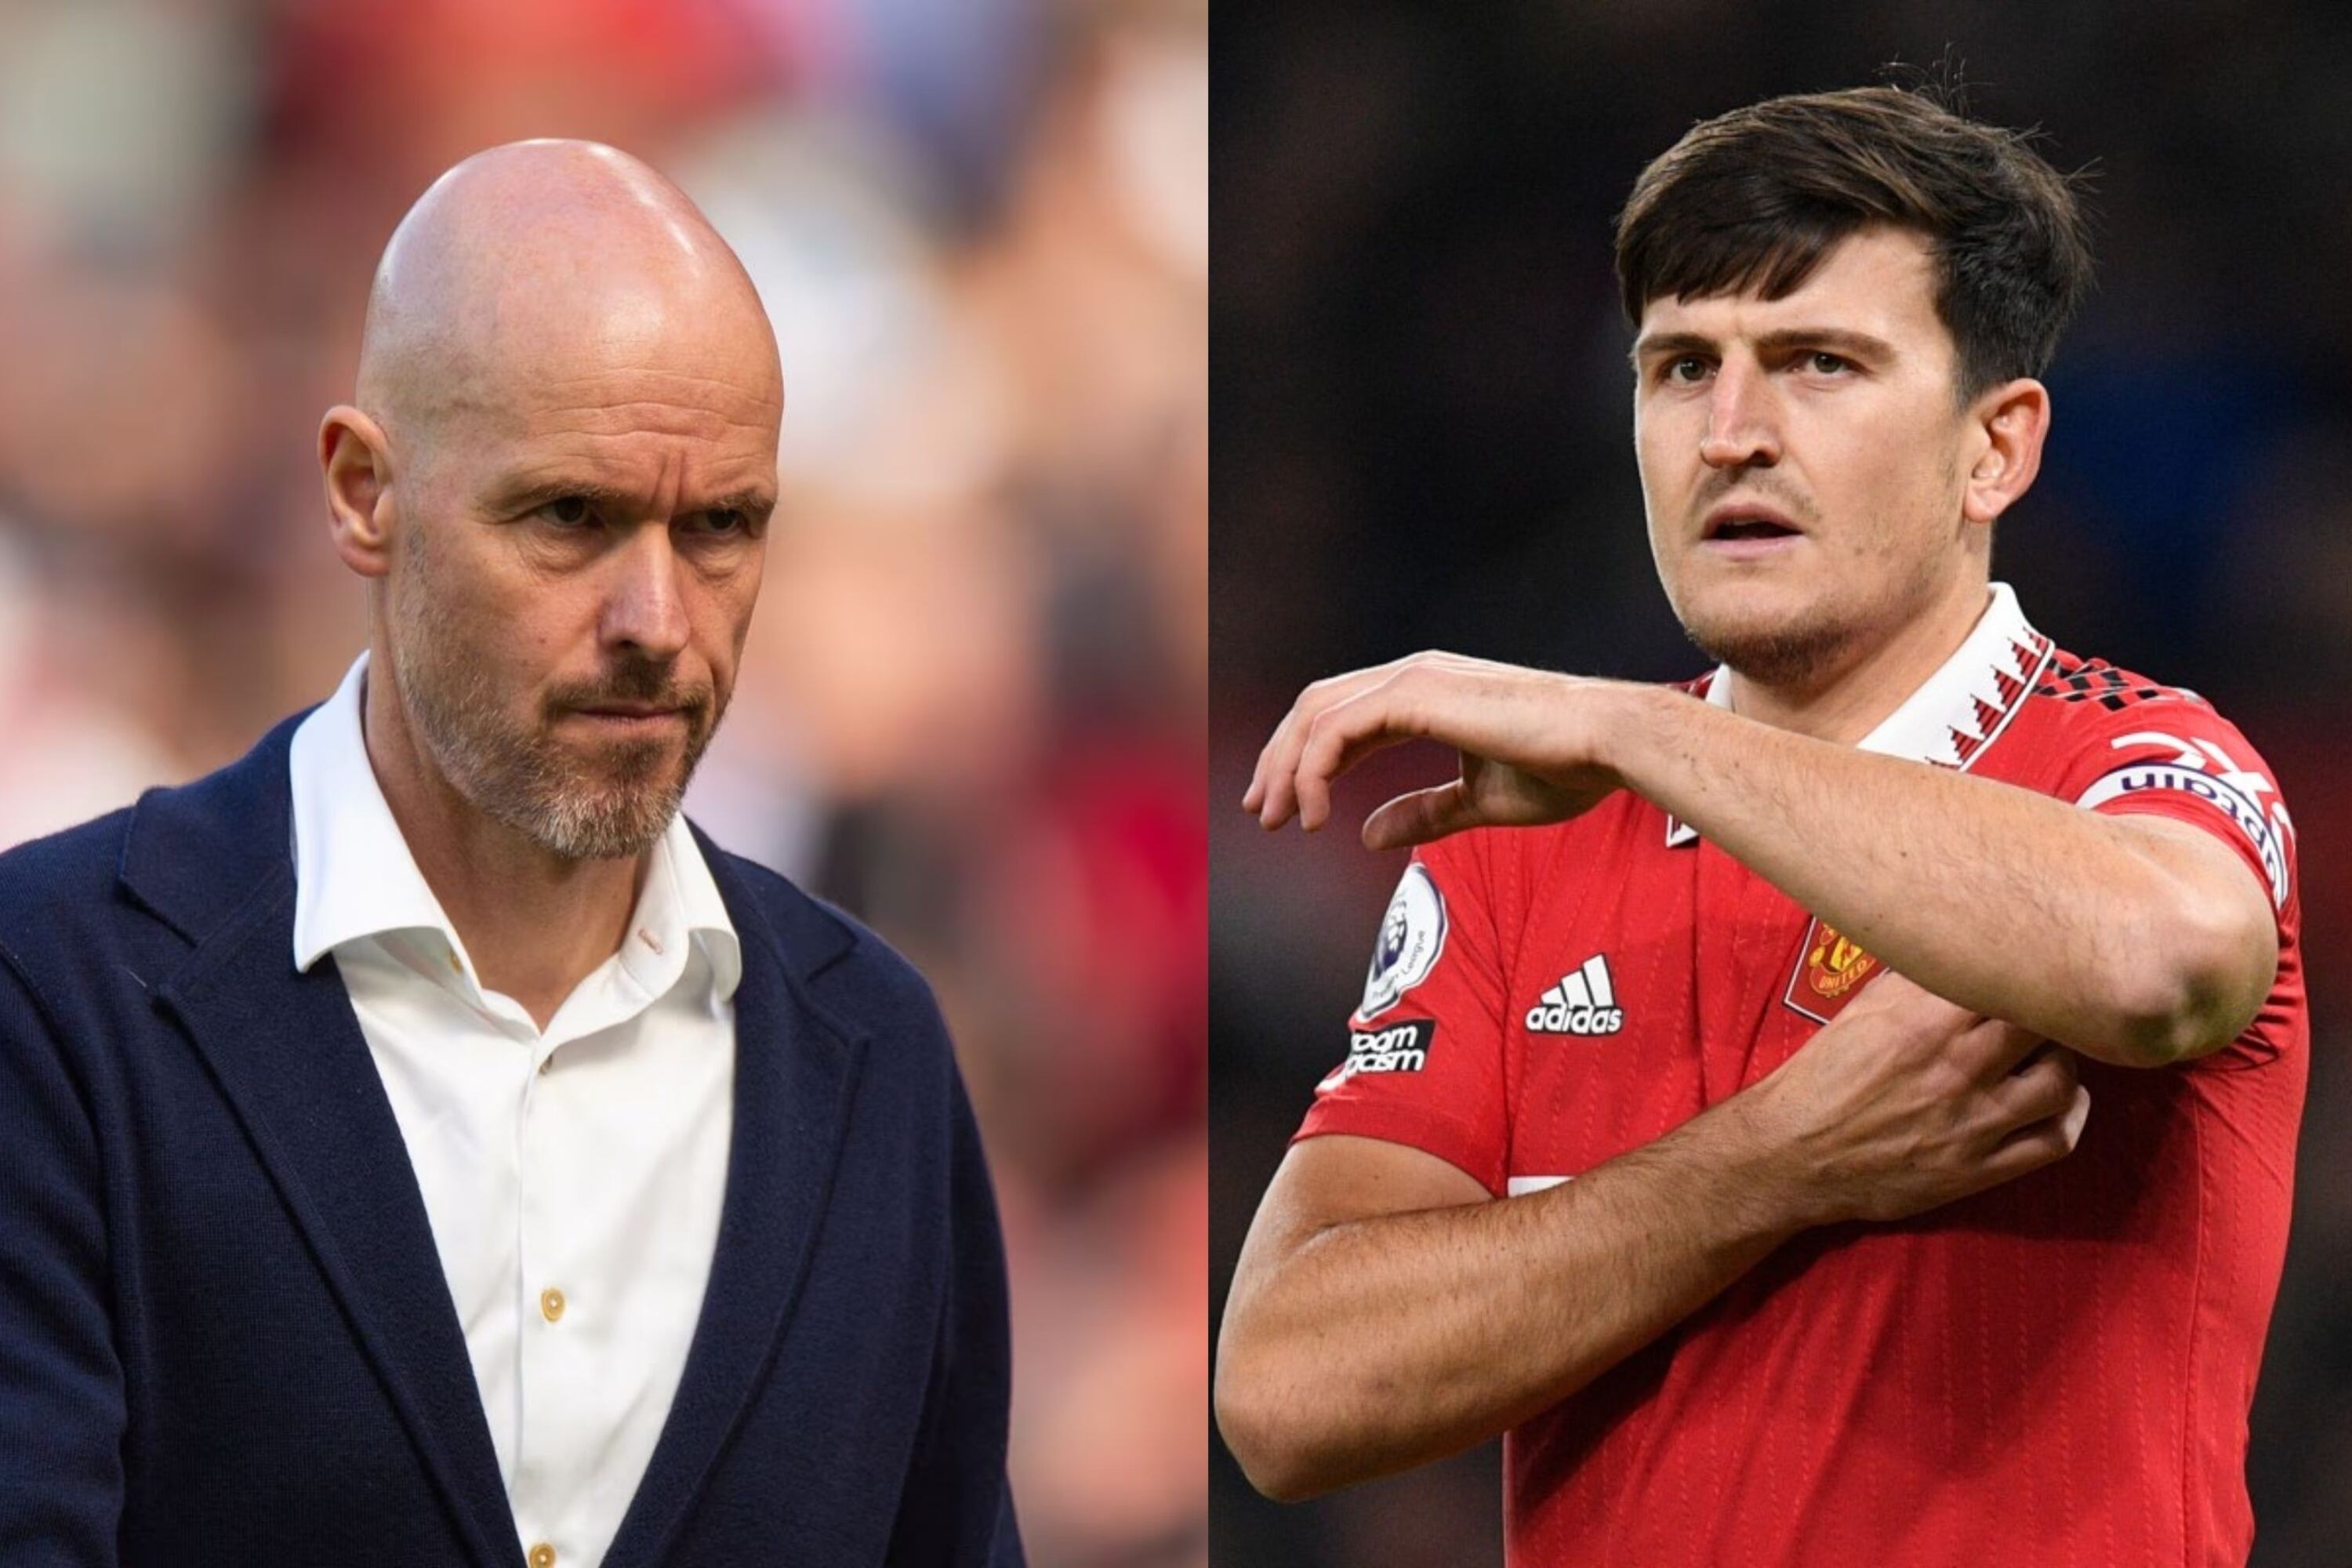 Despite saying he has improved, what Ten Hag did that makes Maguire uncomfortable